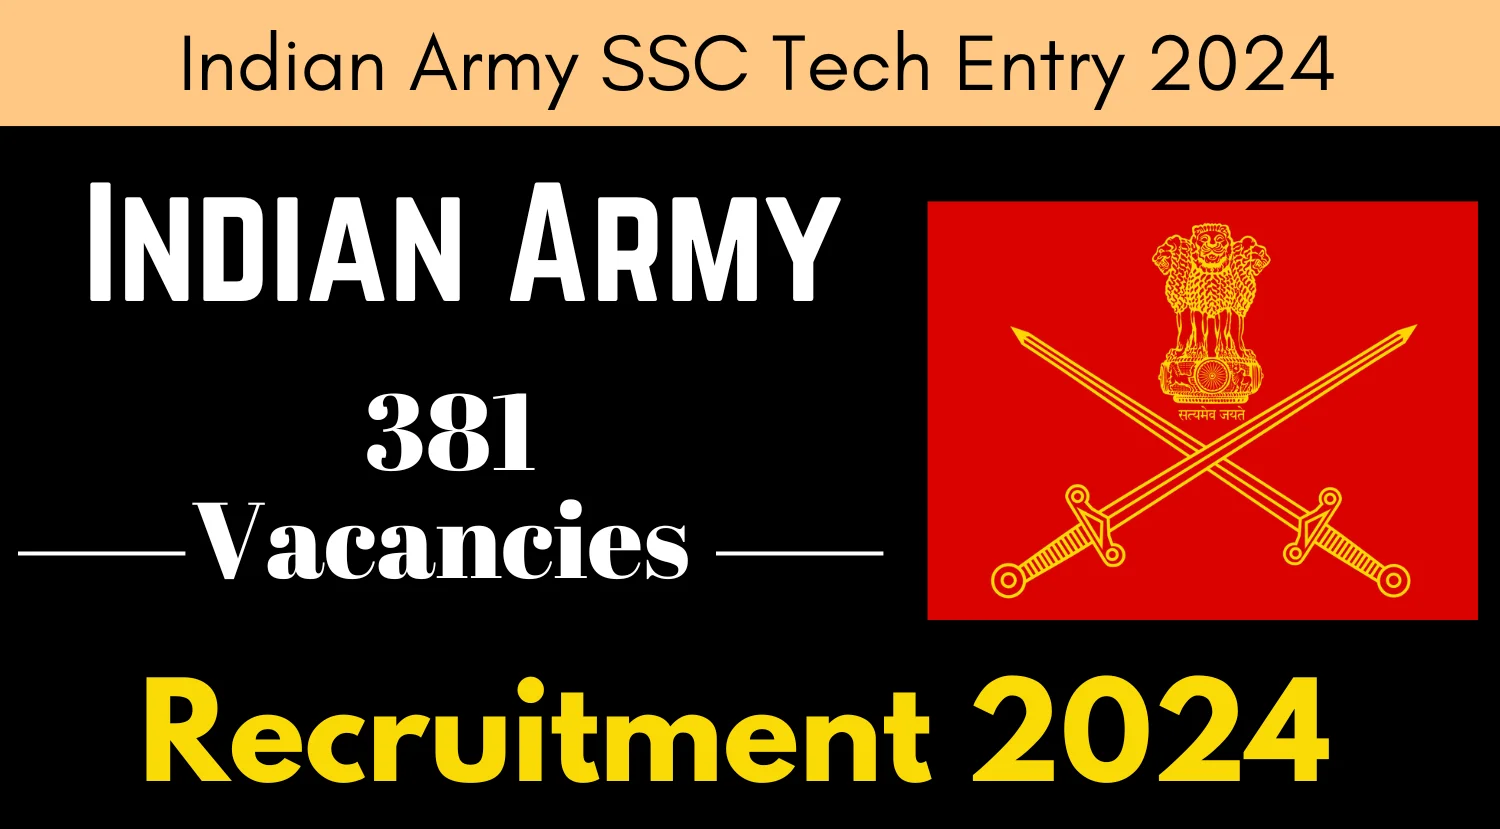 Indian Army SSC Tech Entry 2024